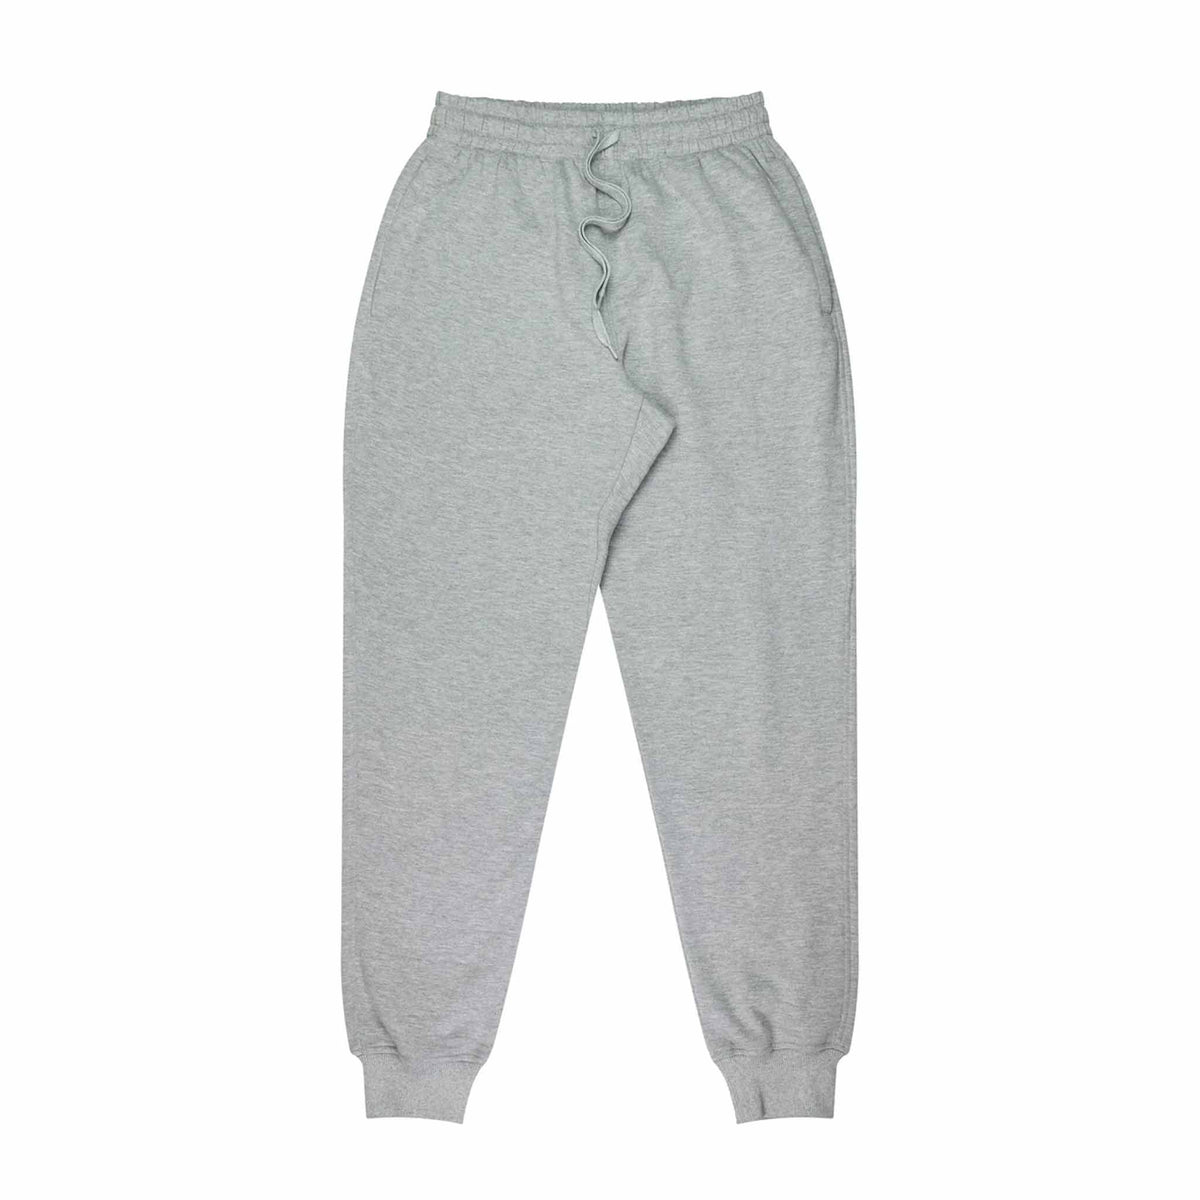 aussie pacific tapered fleece pant in grey marle